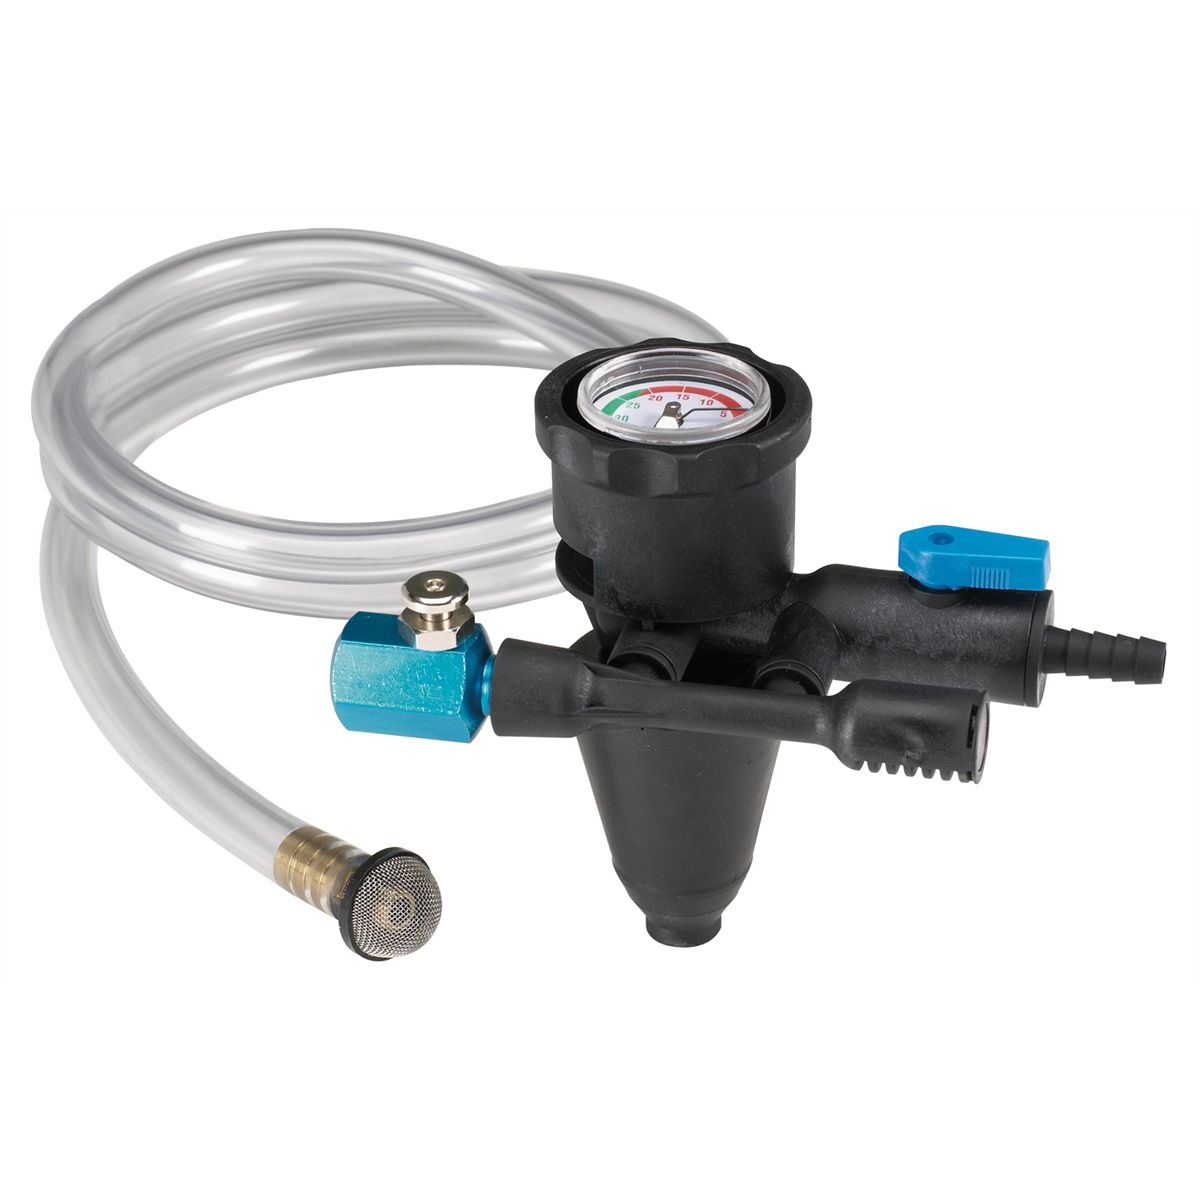 Uview 550500 Airlift II Cooling System Service Tool